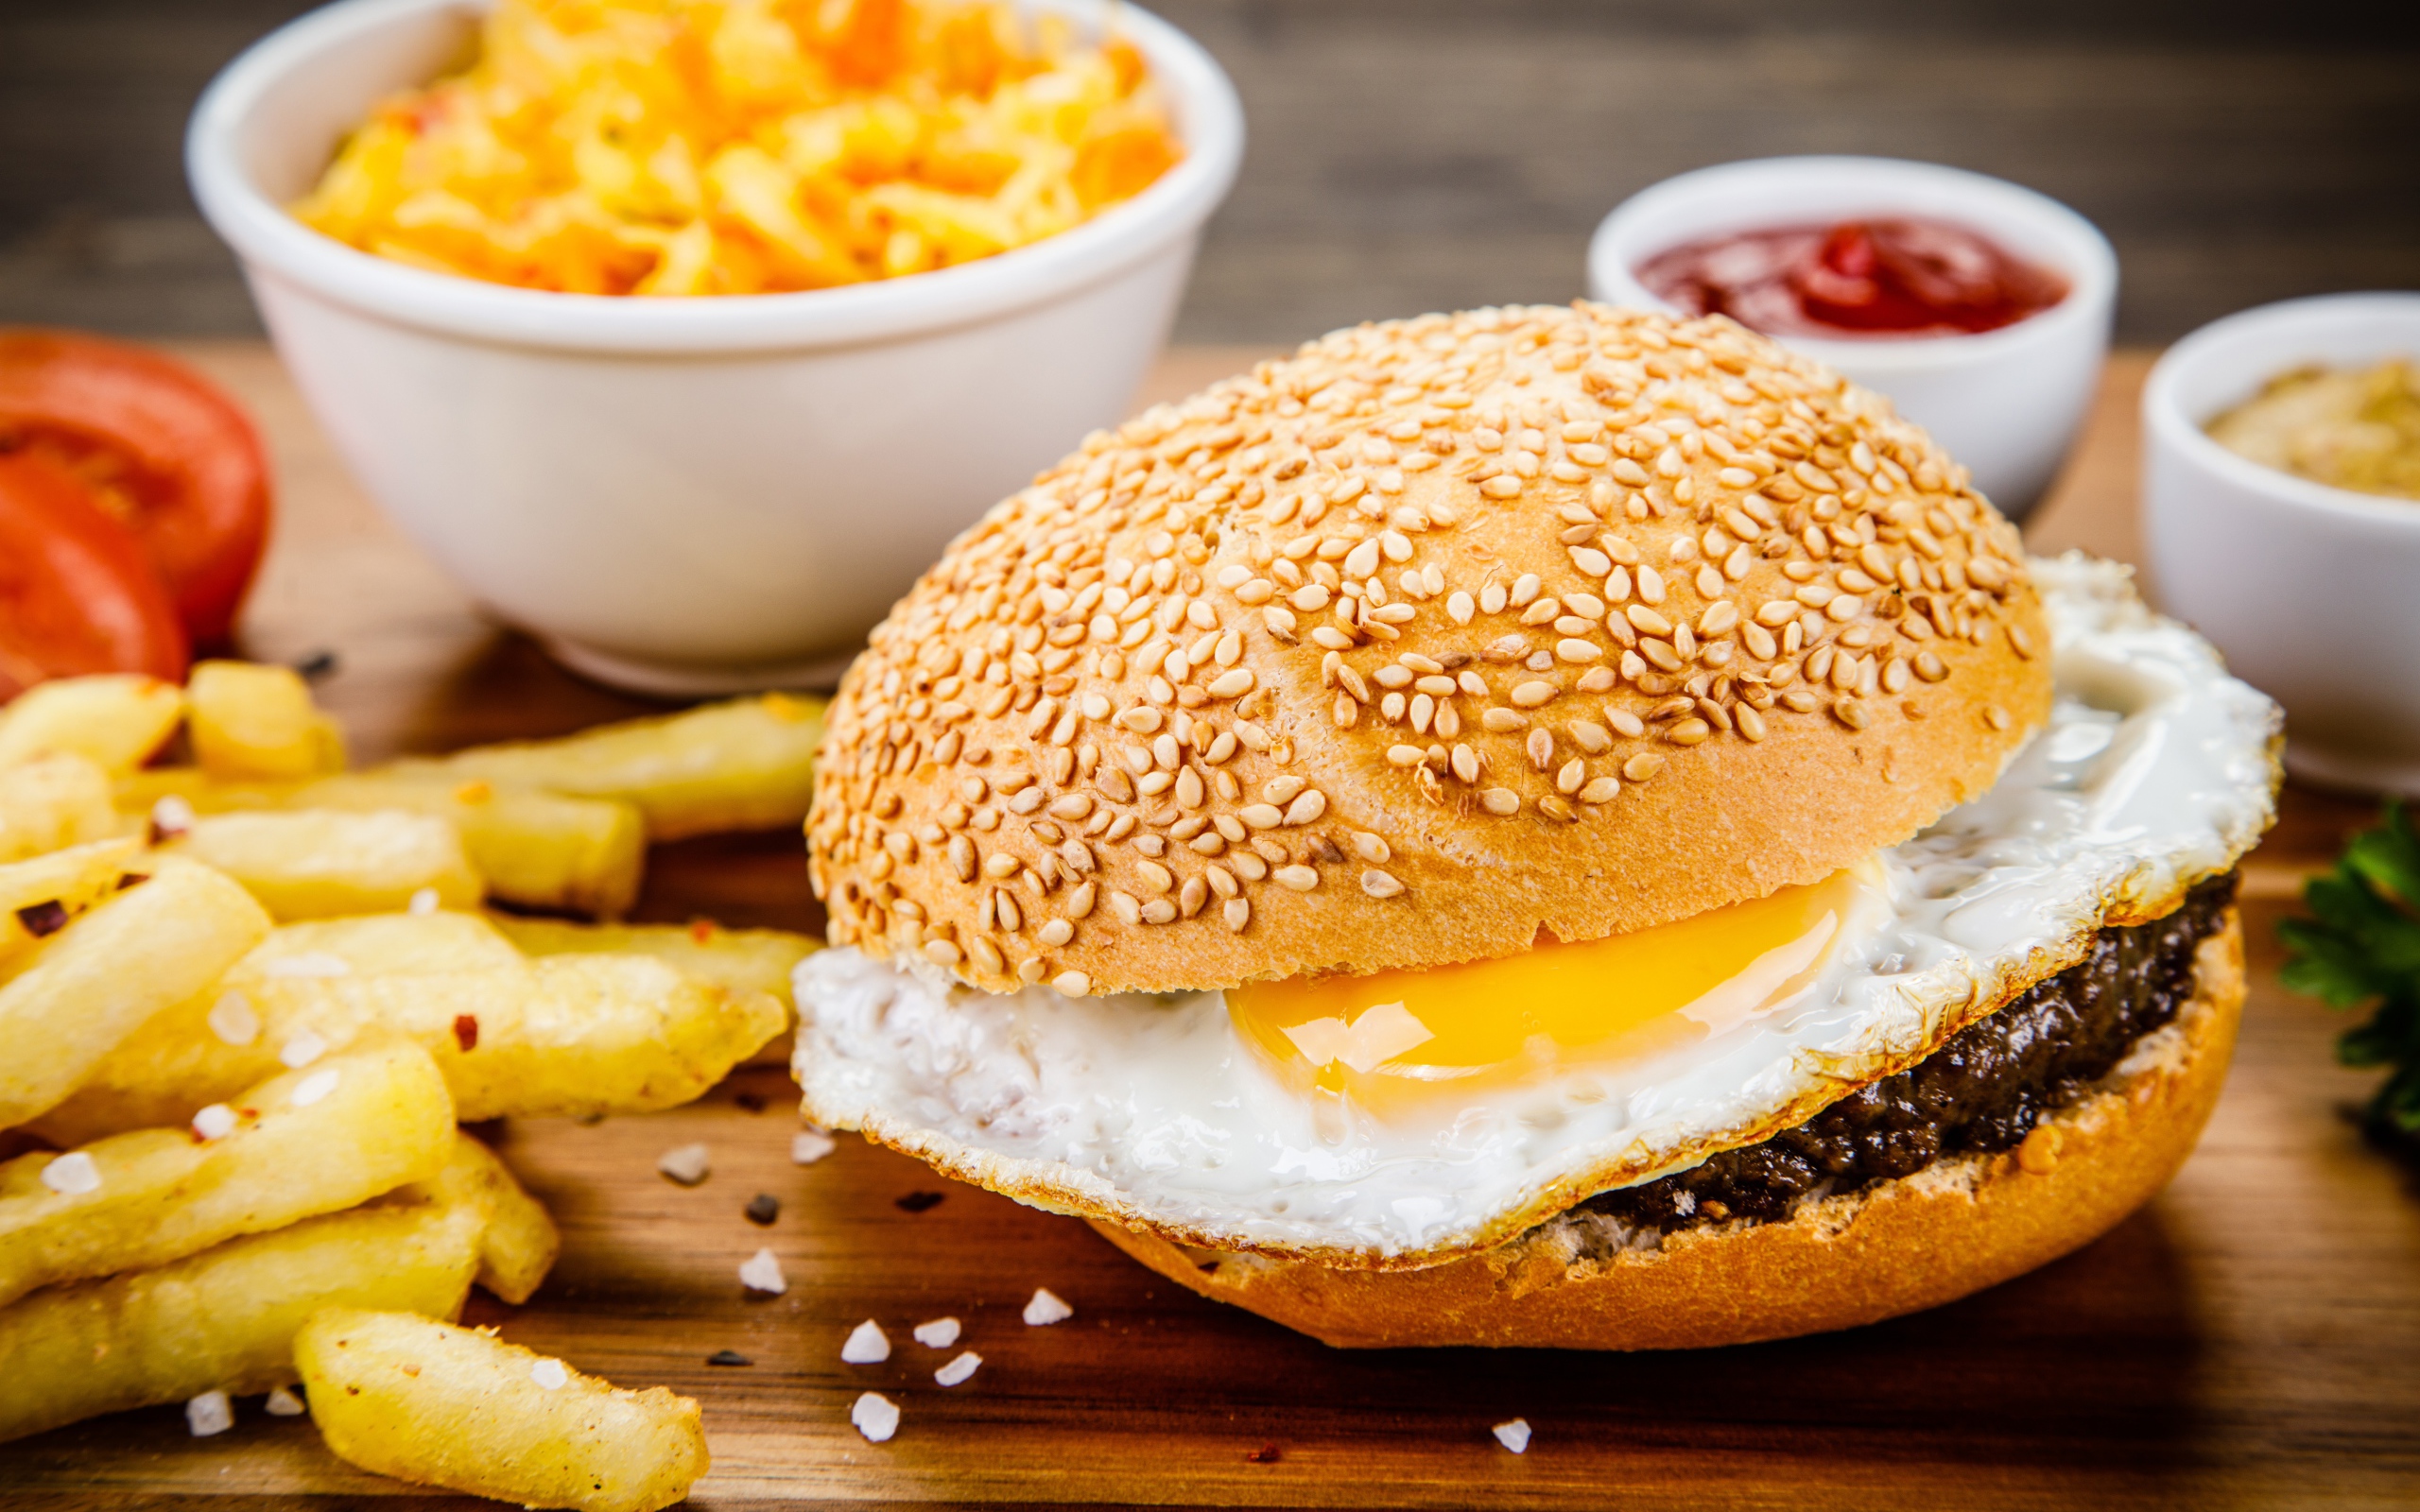 Hamburger with scrambled eggs on the table with french fries and sauce